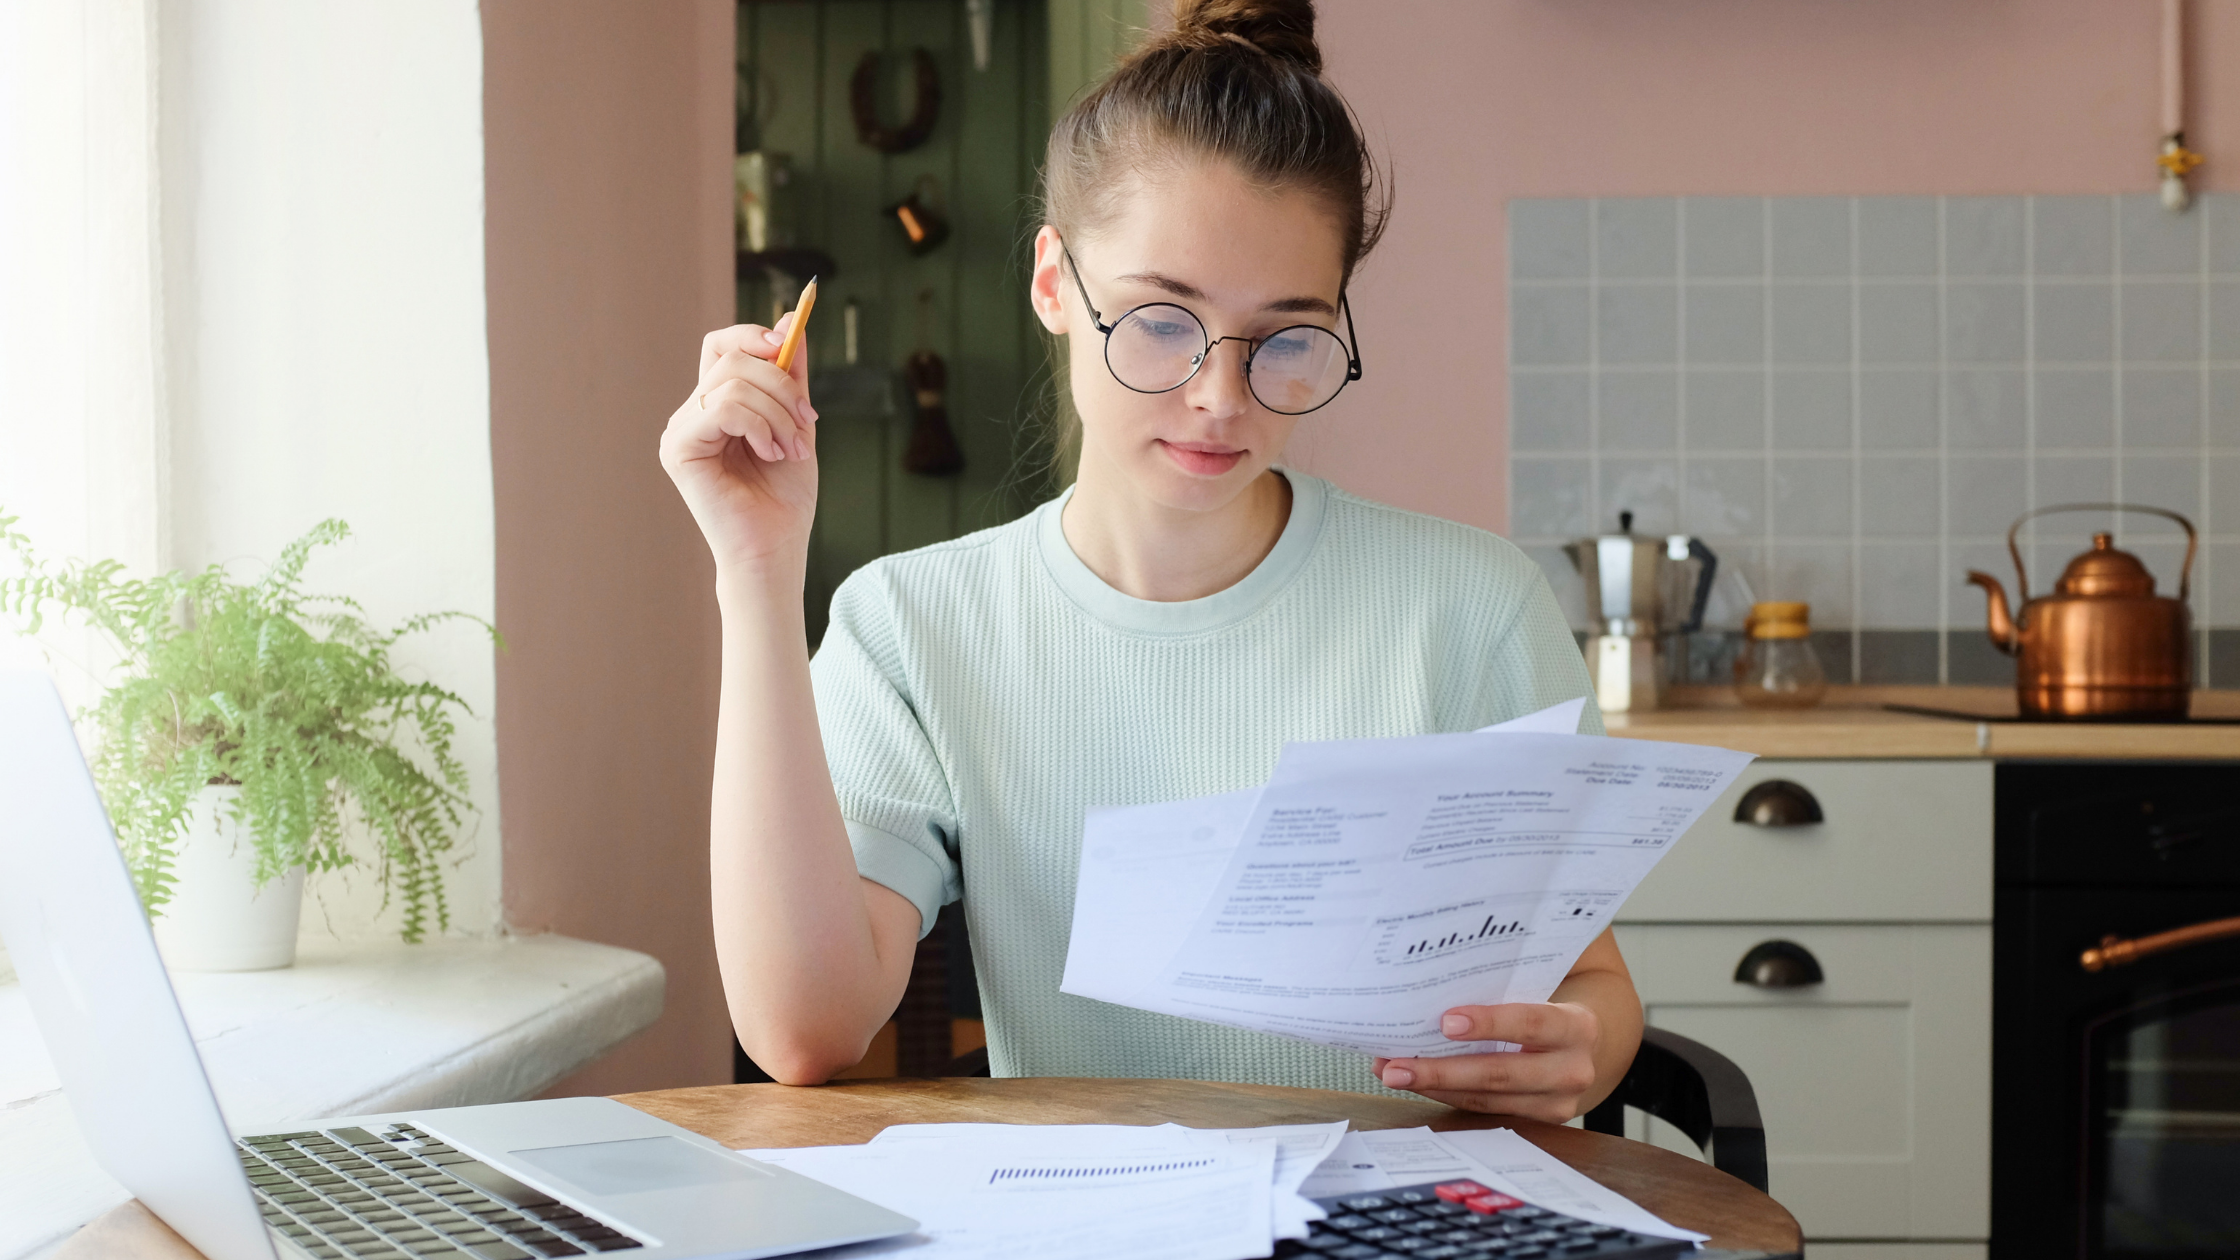 5 Common Tax Deductions that Small Business Owners Often Overlook